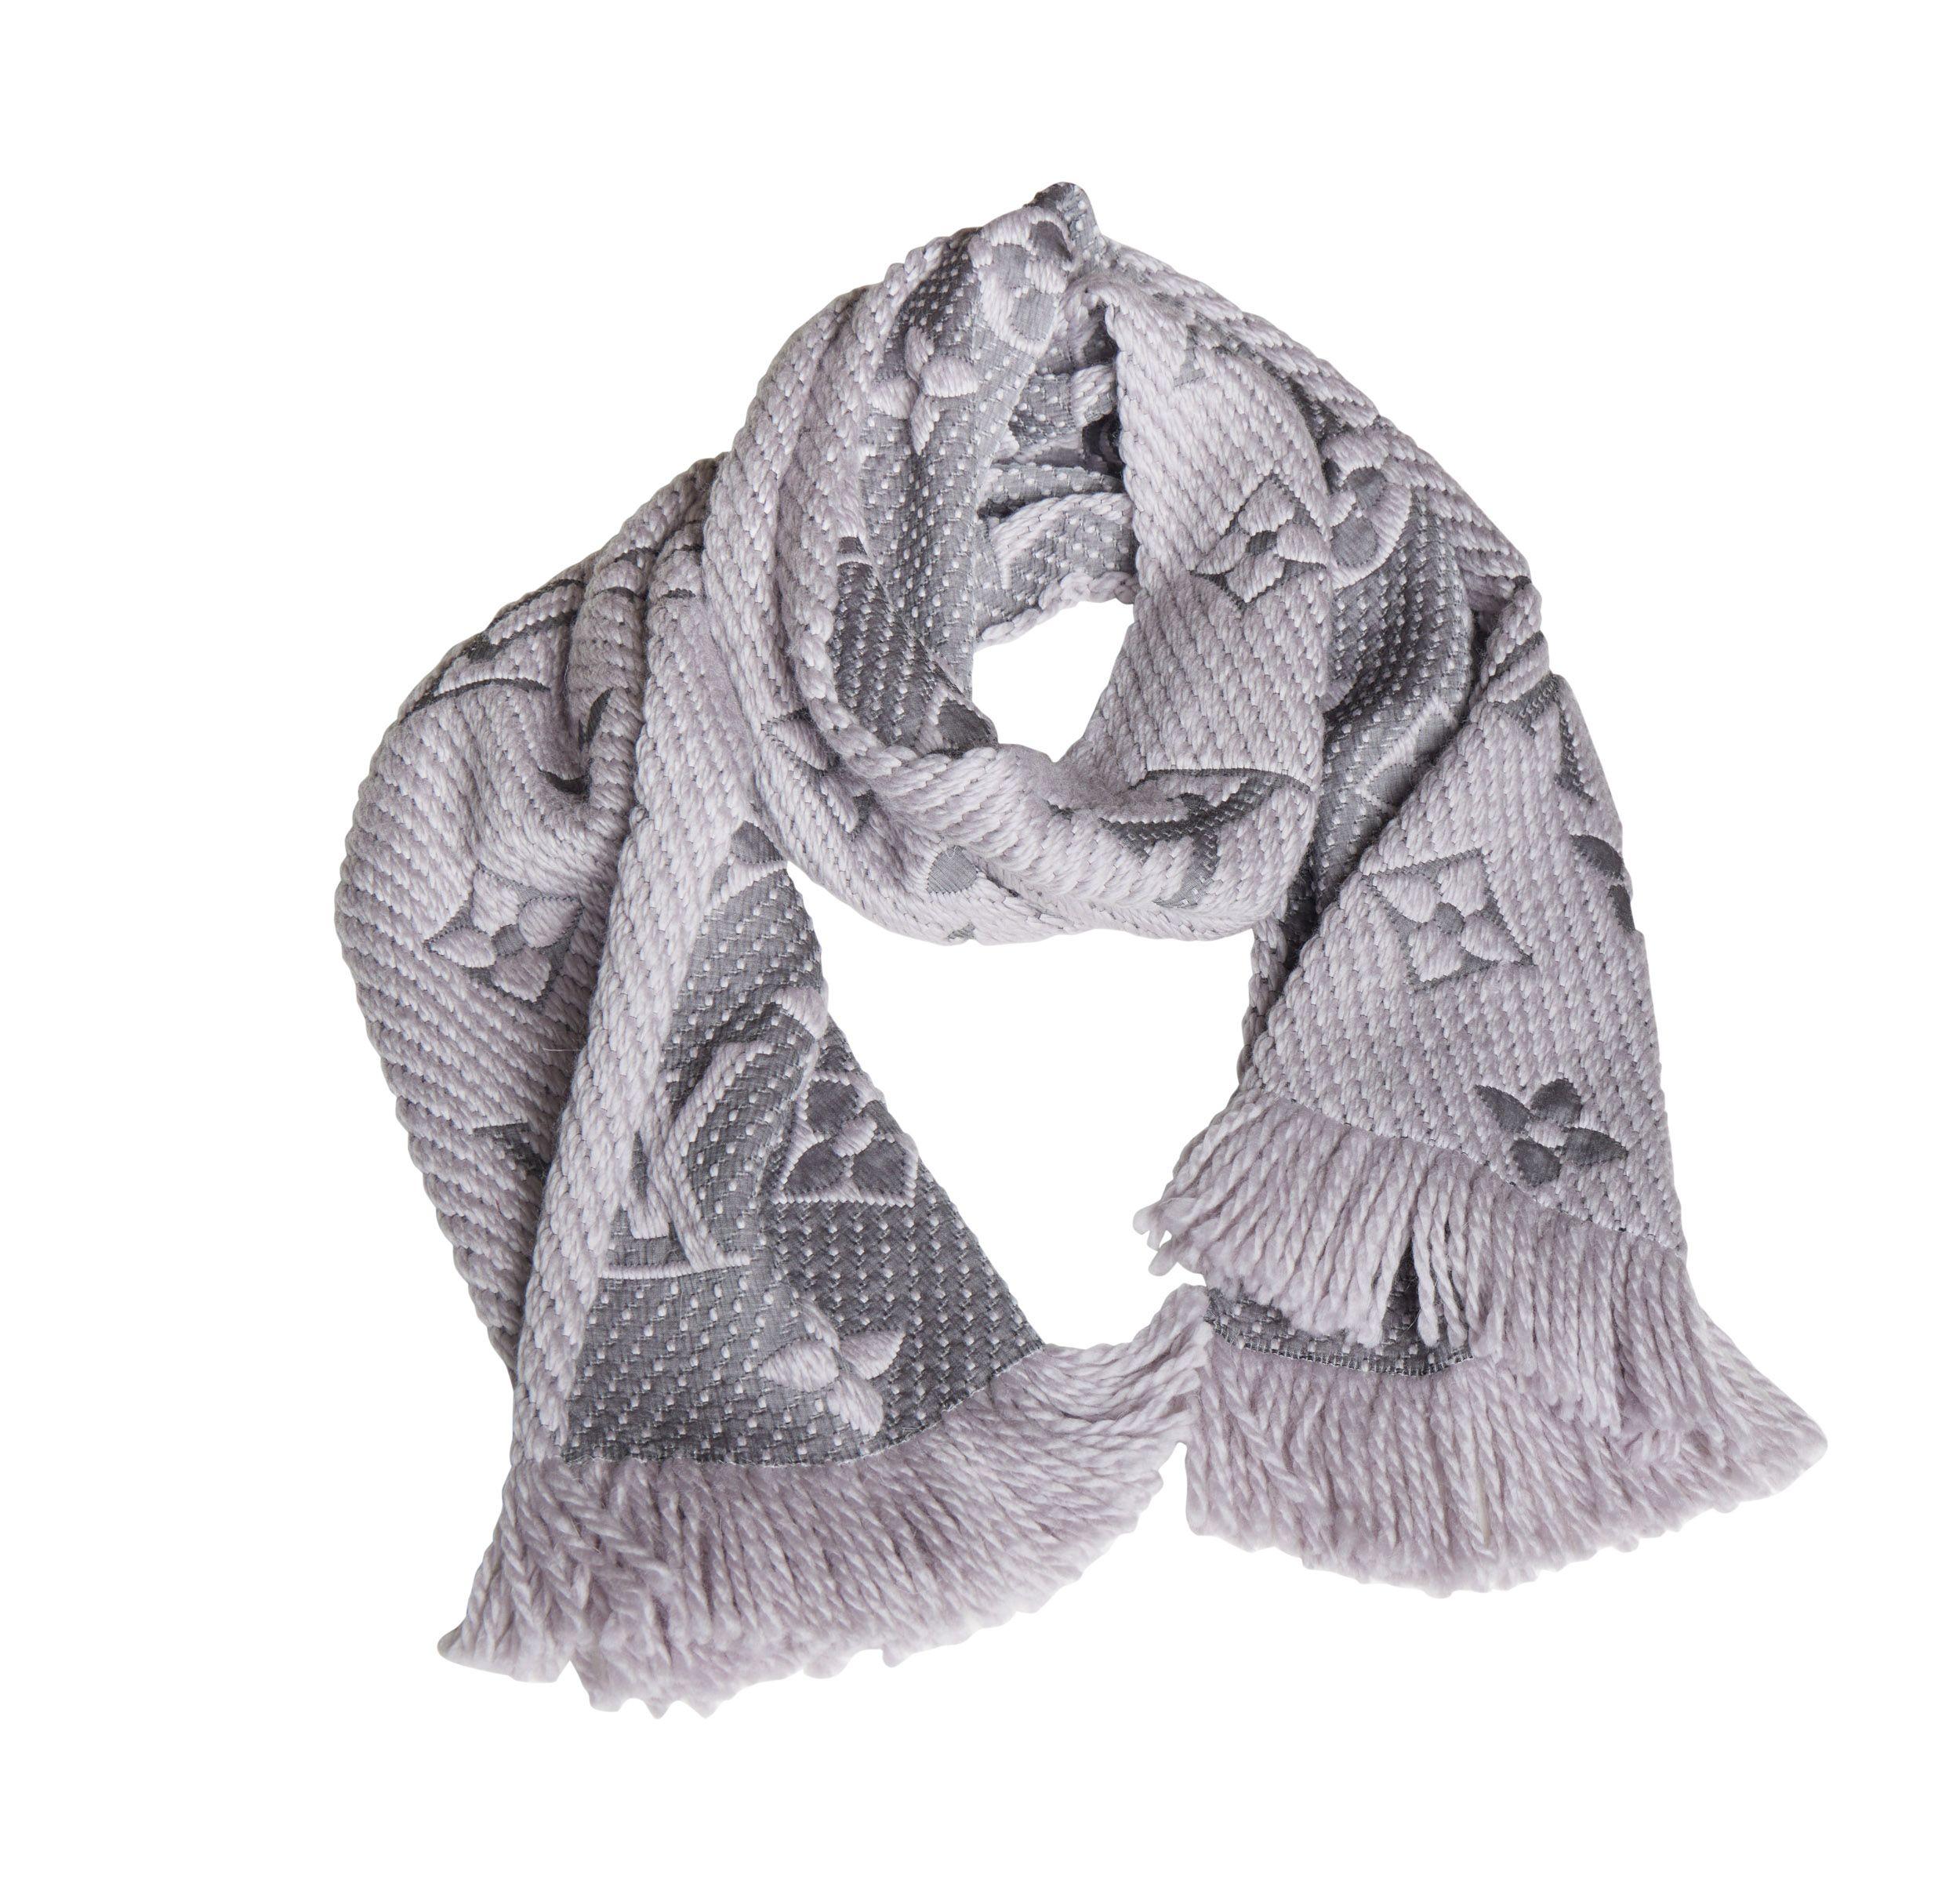 A brand new Louis Vuitton Logomania scarf in grey. This piece is an absolute classic an a must have for the winter. It keeps you warm and looks super chic. The lurex material gives the scarf a metallic look so it's also perfect for the evening. It